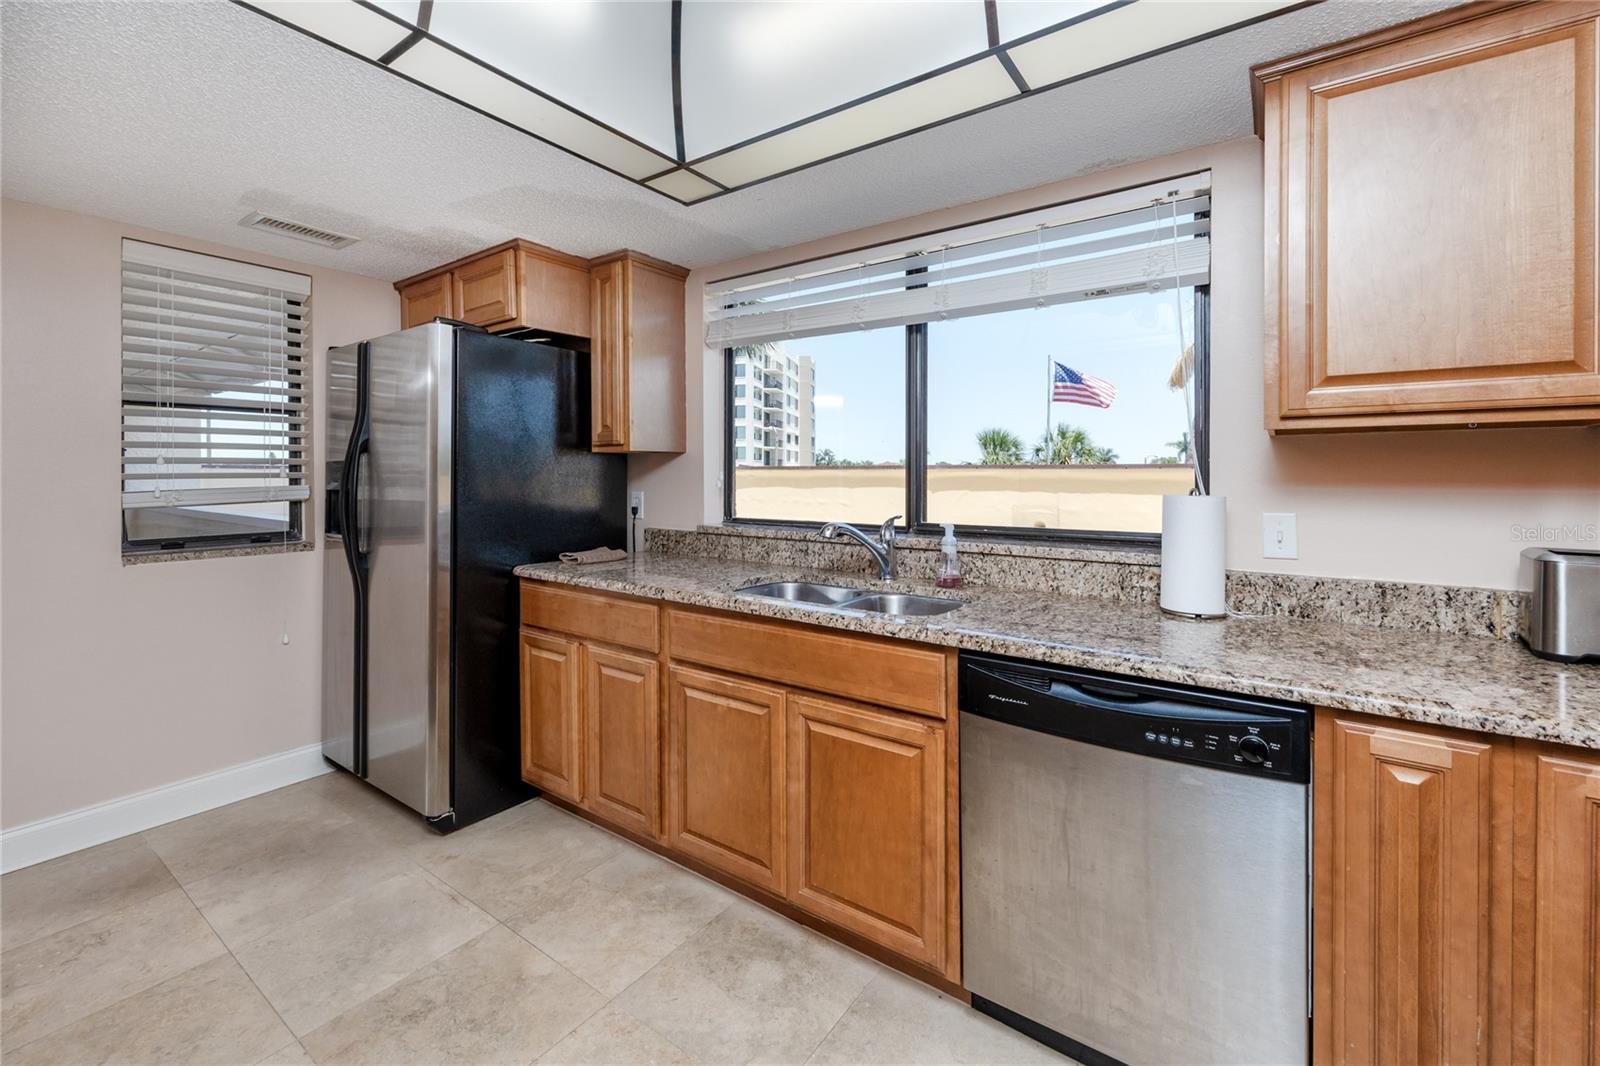 Large, spacious kitchen with granite countertops